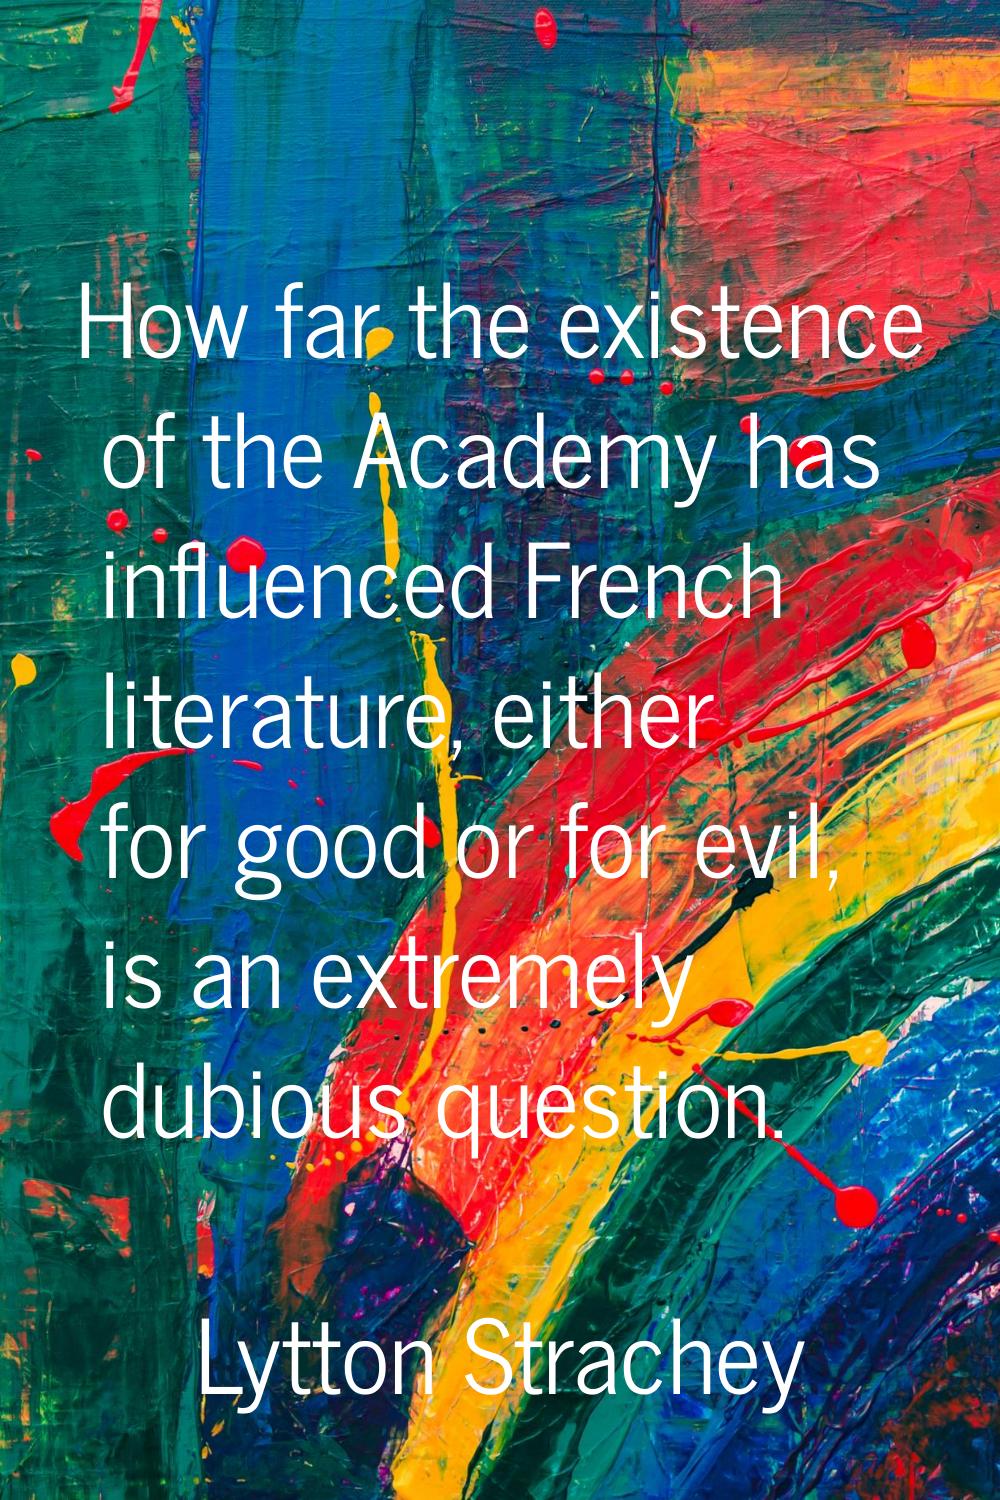 How far the existence of the Academy has influenced French literature, either for good or for evil,